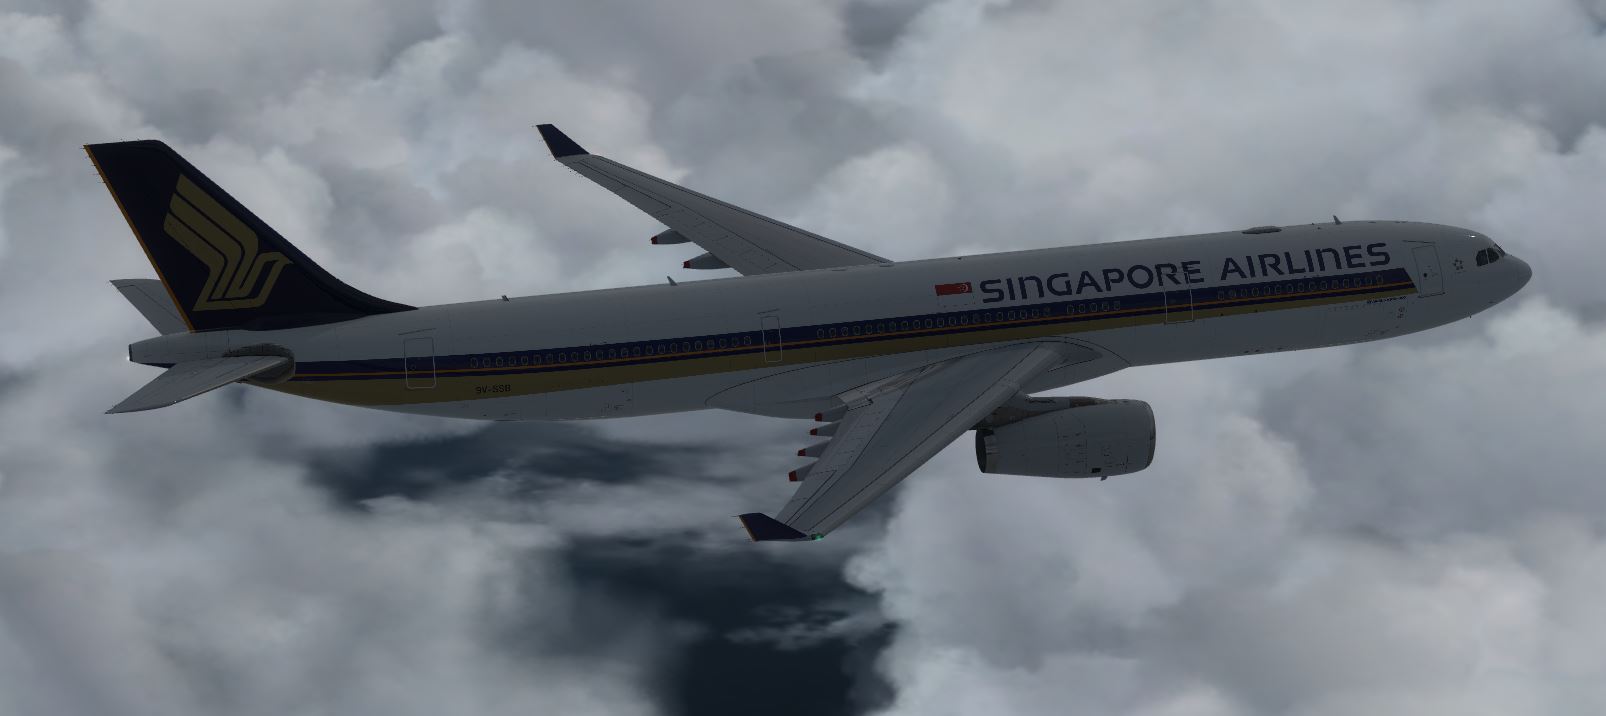 AS A330 Singapore Airlines-4001 